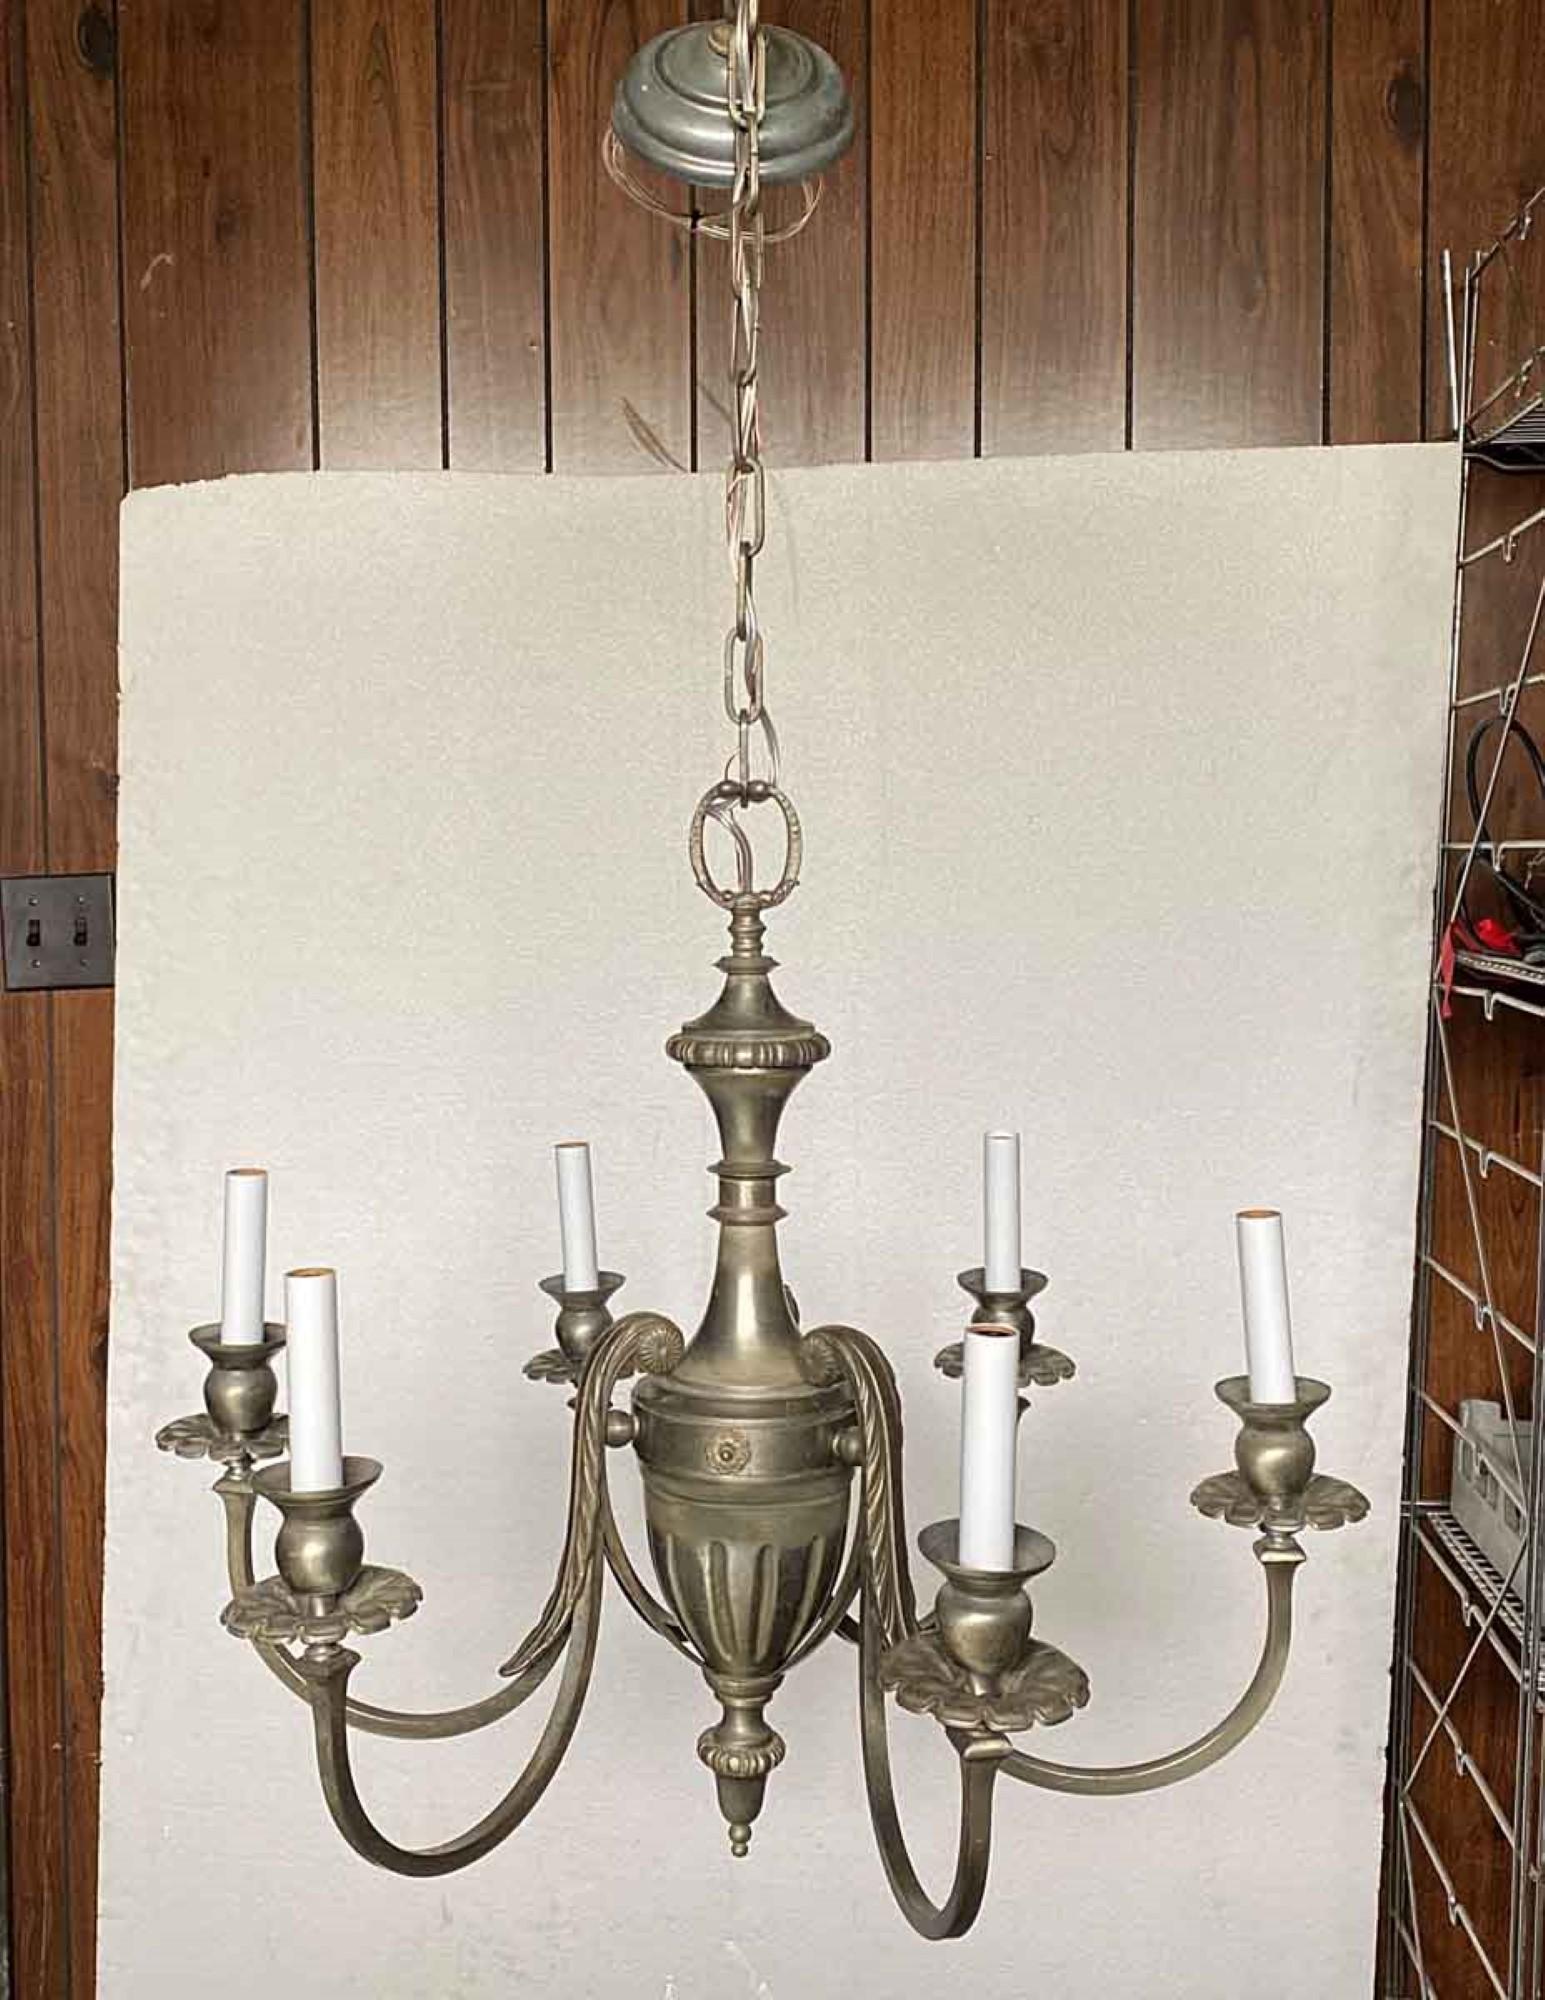 1920s Federal style brushed nickel over cast brass chandelier with six candelabra arms. This can be seen at our 400 Gilligan St location in Scranton, PA. 